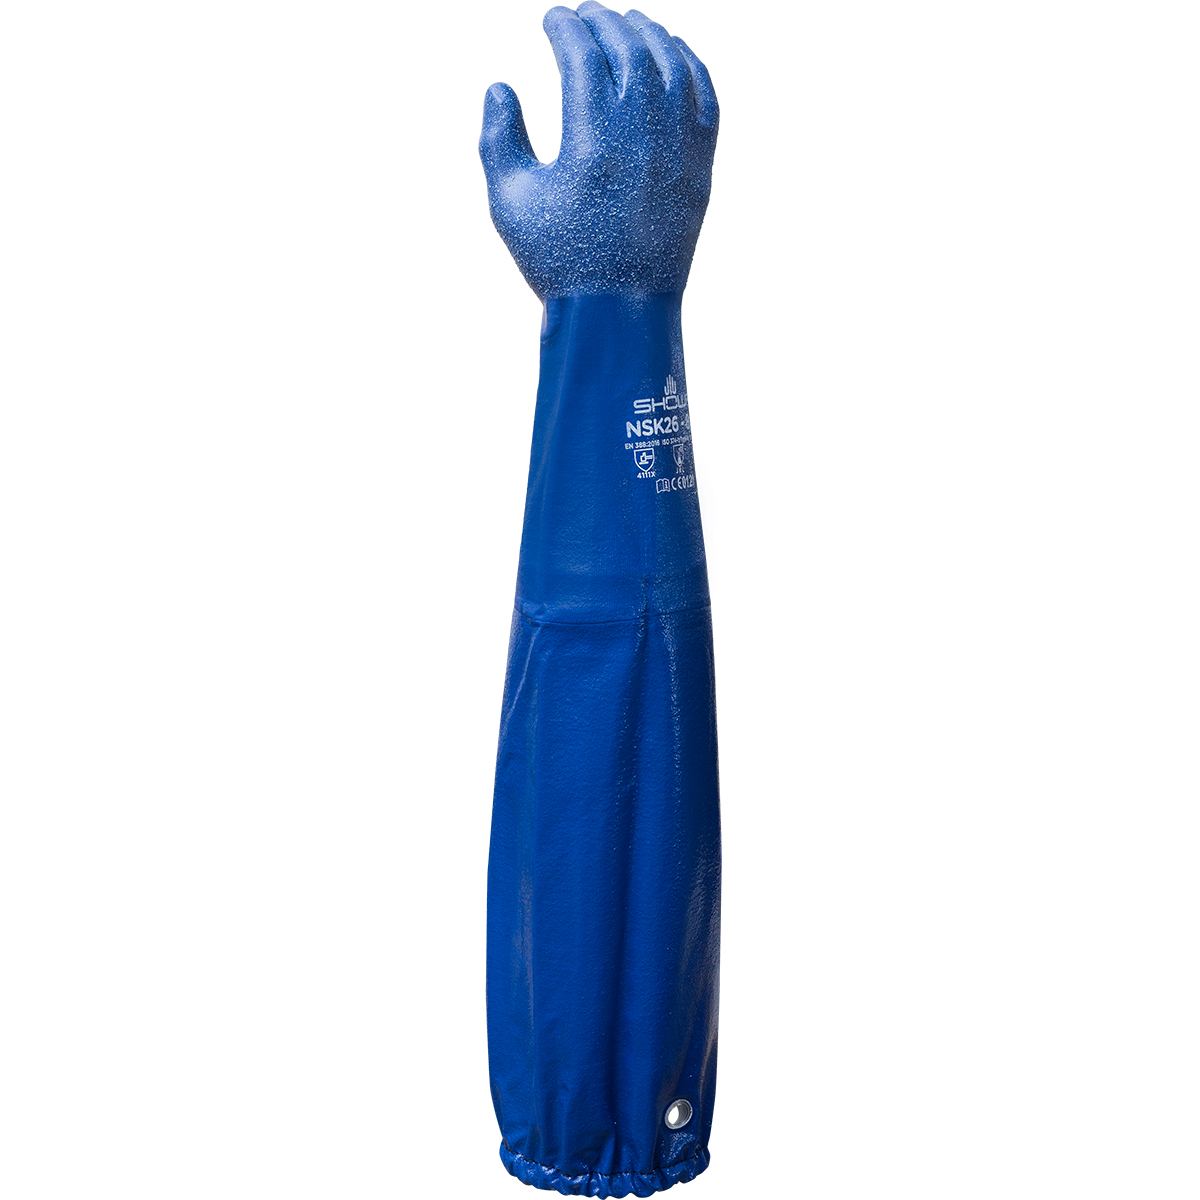 Chemical resistant nitrile, fully coated 26" extended gauntlet, royal blue, rough finish, cotton interlock liner, large